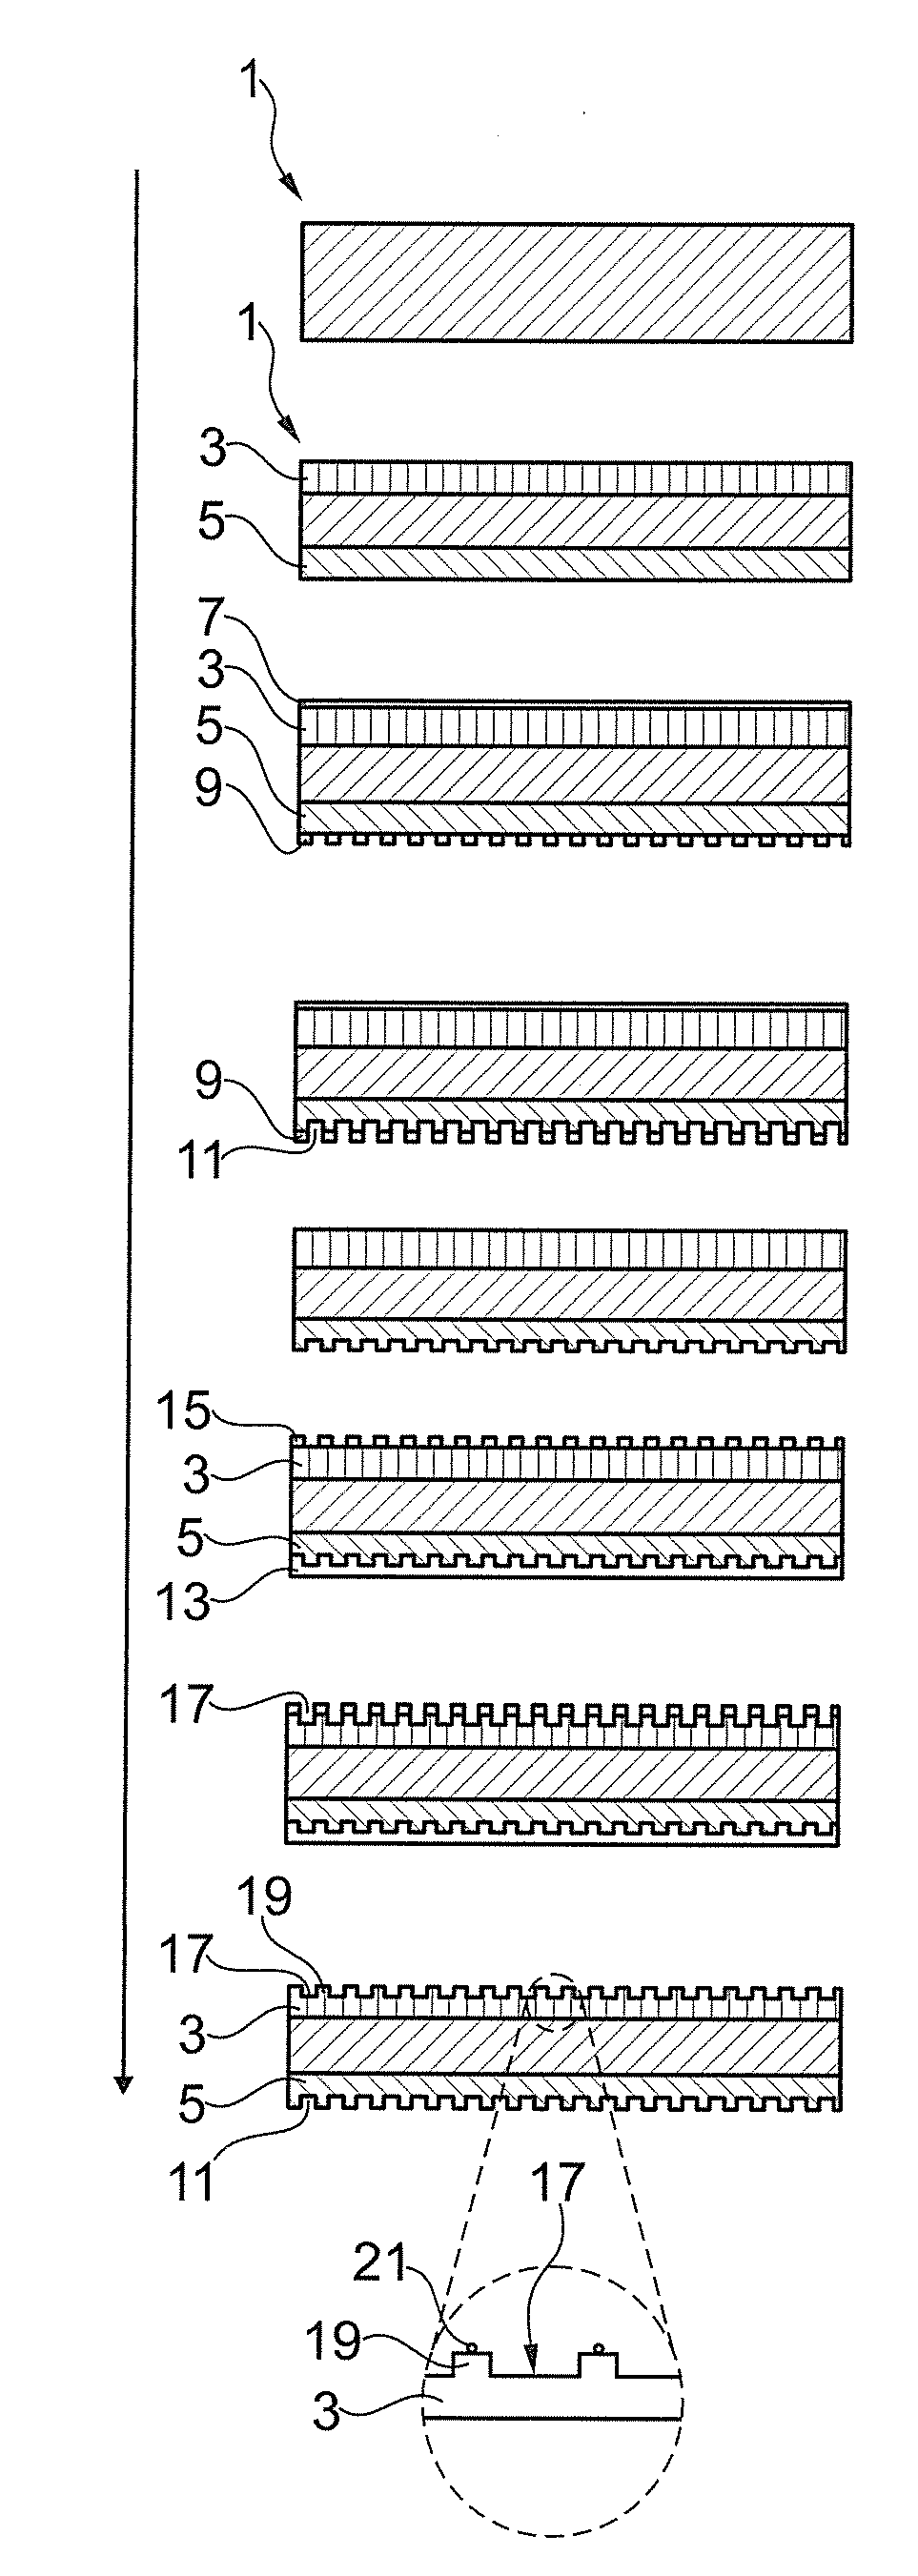 Method for producing solar cells having simultaneously etched-back doped regions